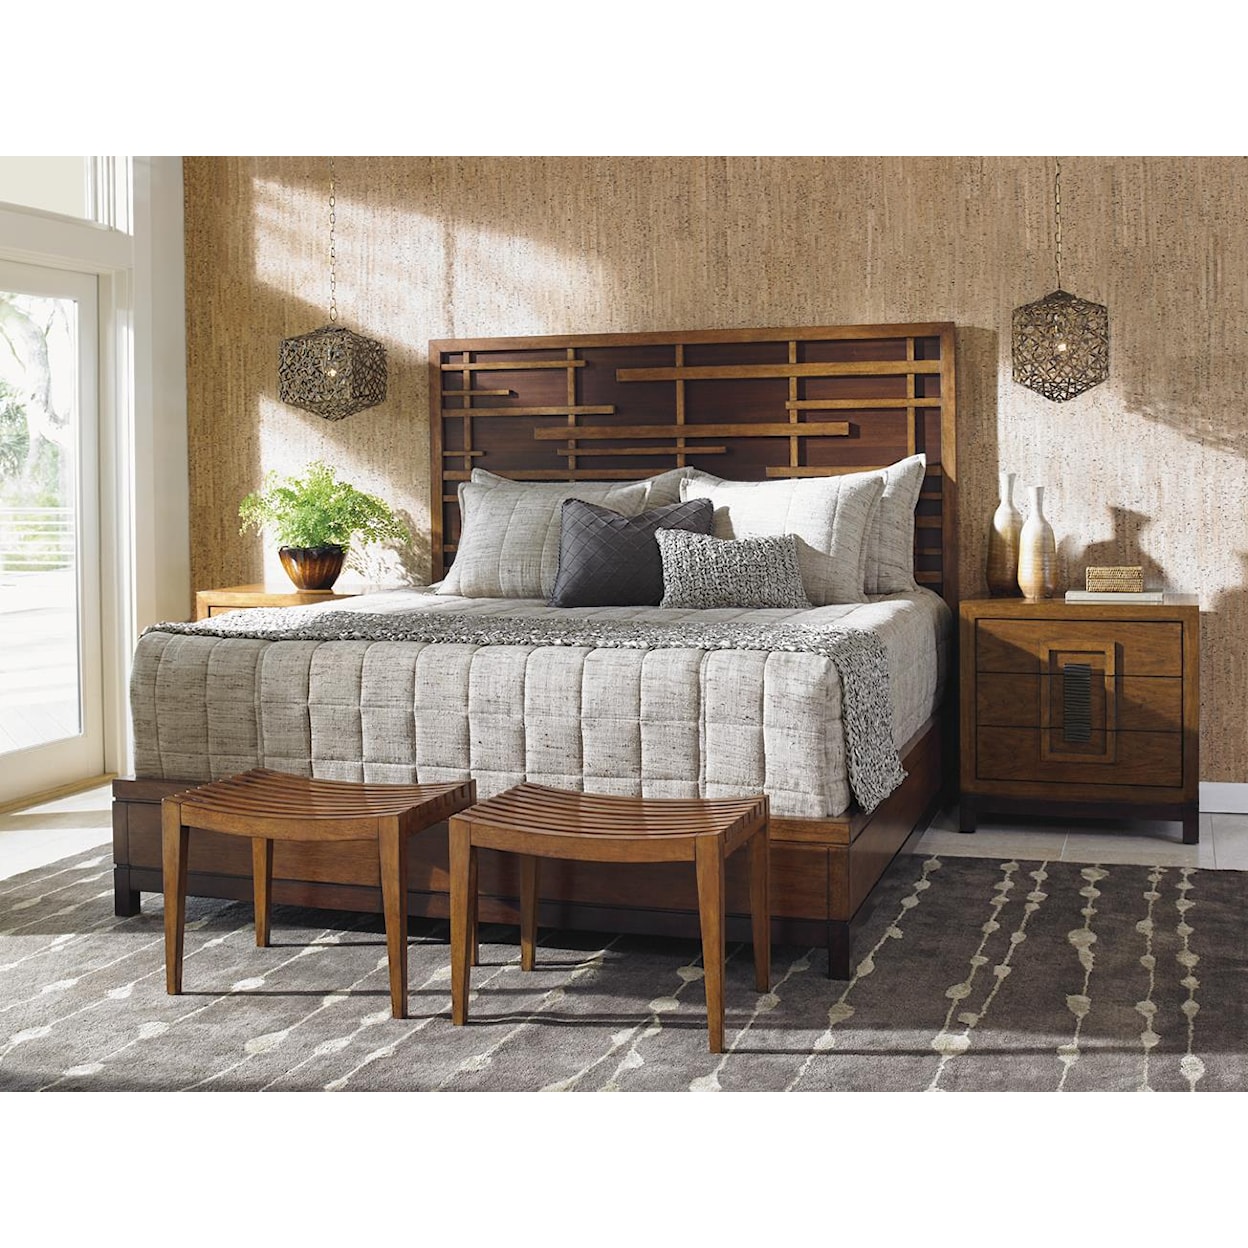 Tommy Bahama Home Island Fusion Shanghai Panel Bed 6/0